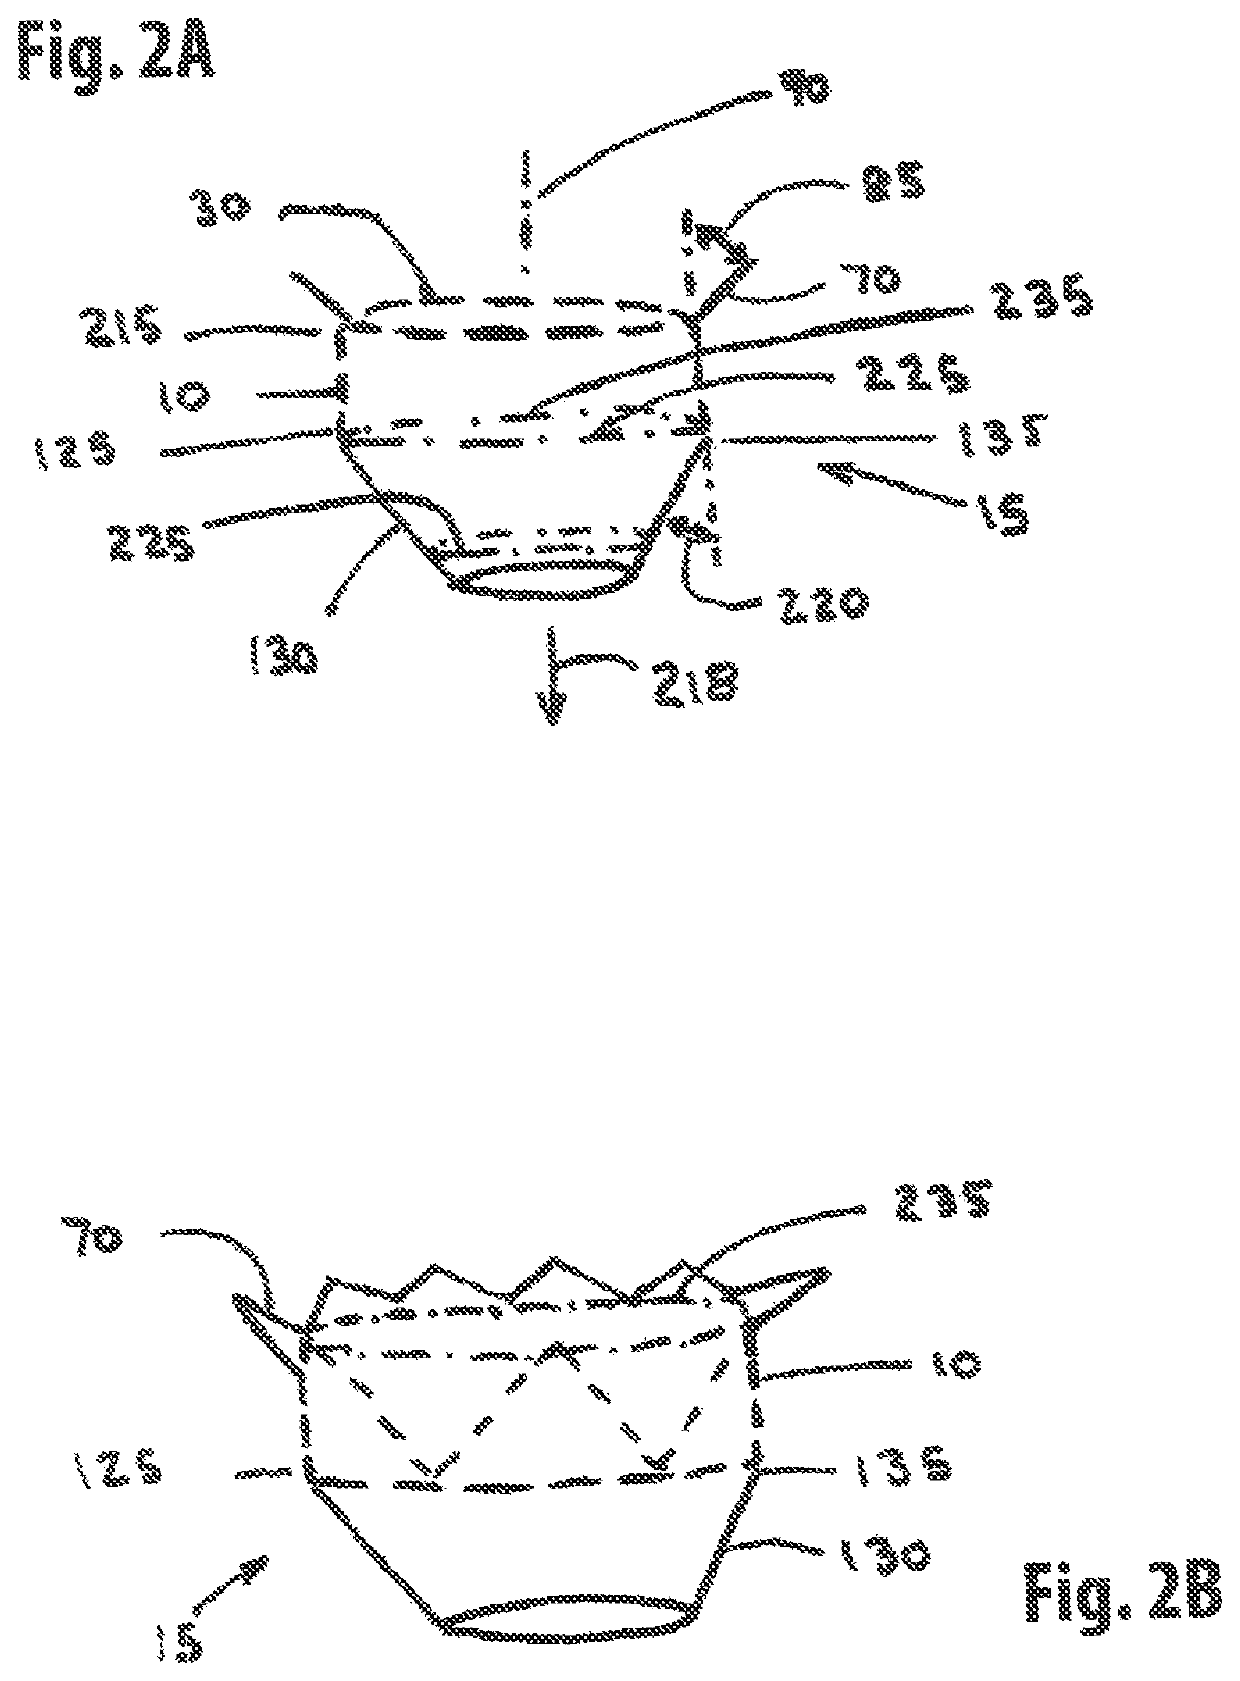 Annuloplasty device and methods